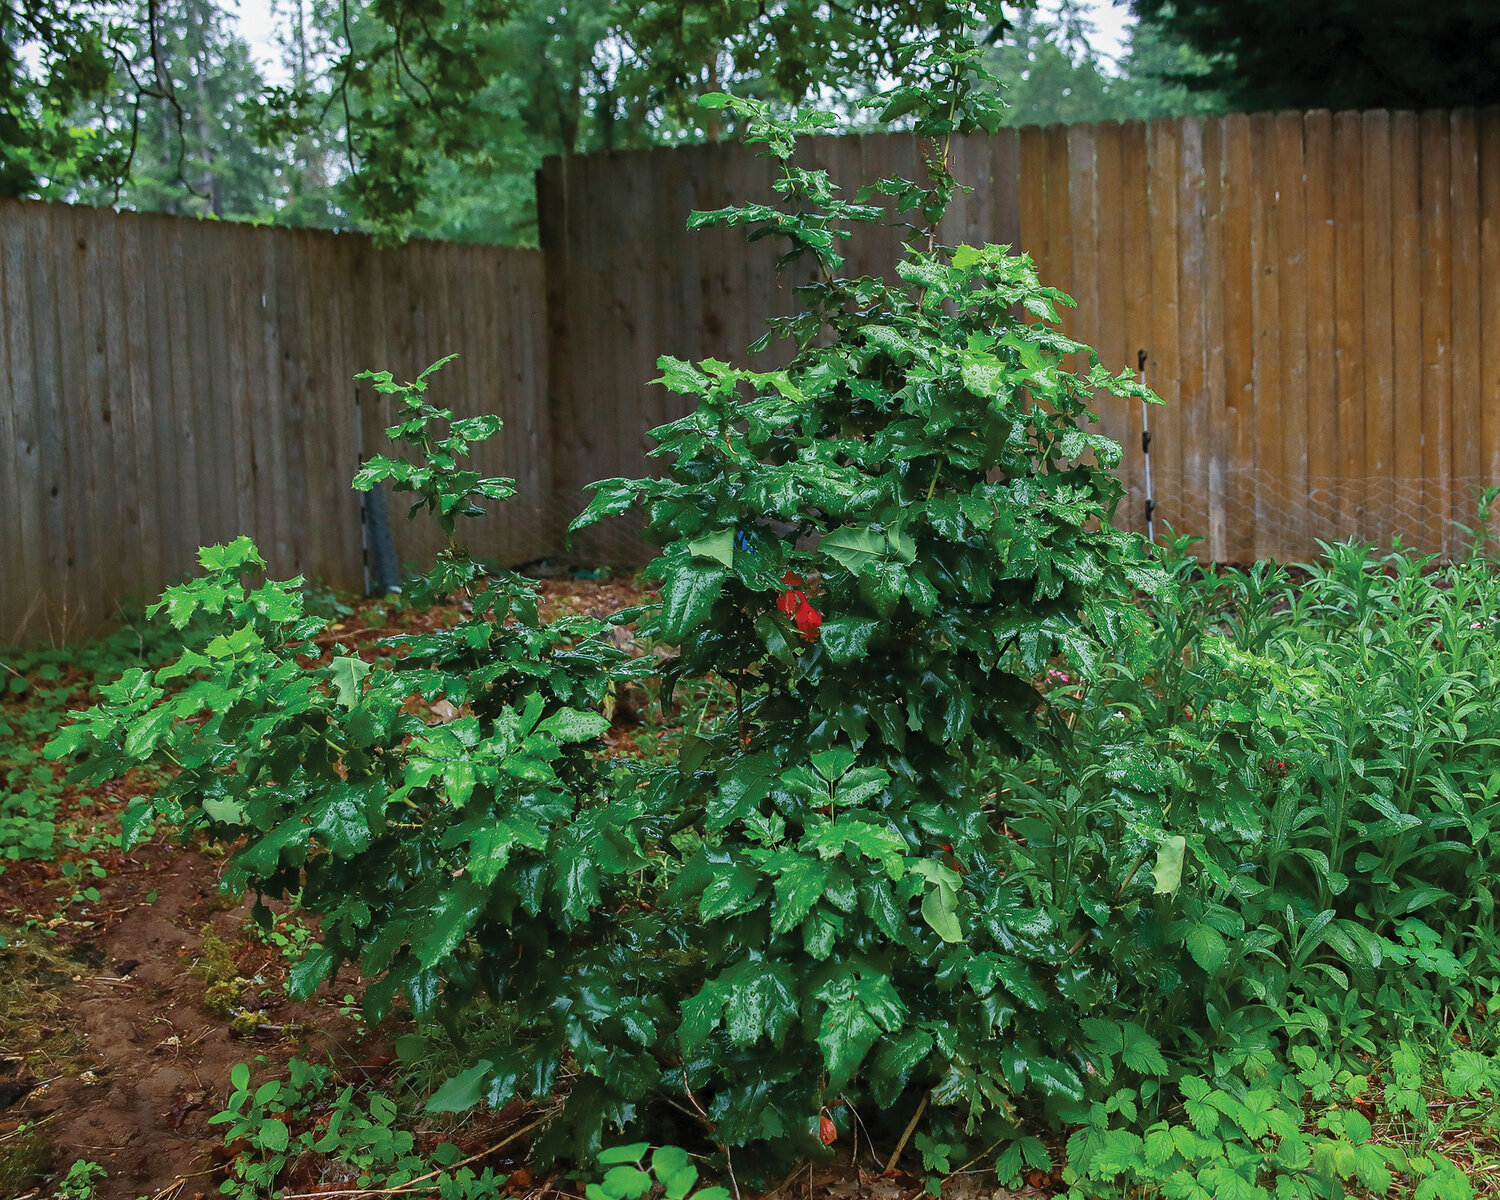 A mature Oregon Grape shrub has reached a height of six feet after being planted three years ago in a native plant garden near Lewisville Park, seen on Friday, June 9.